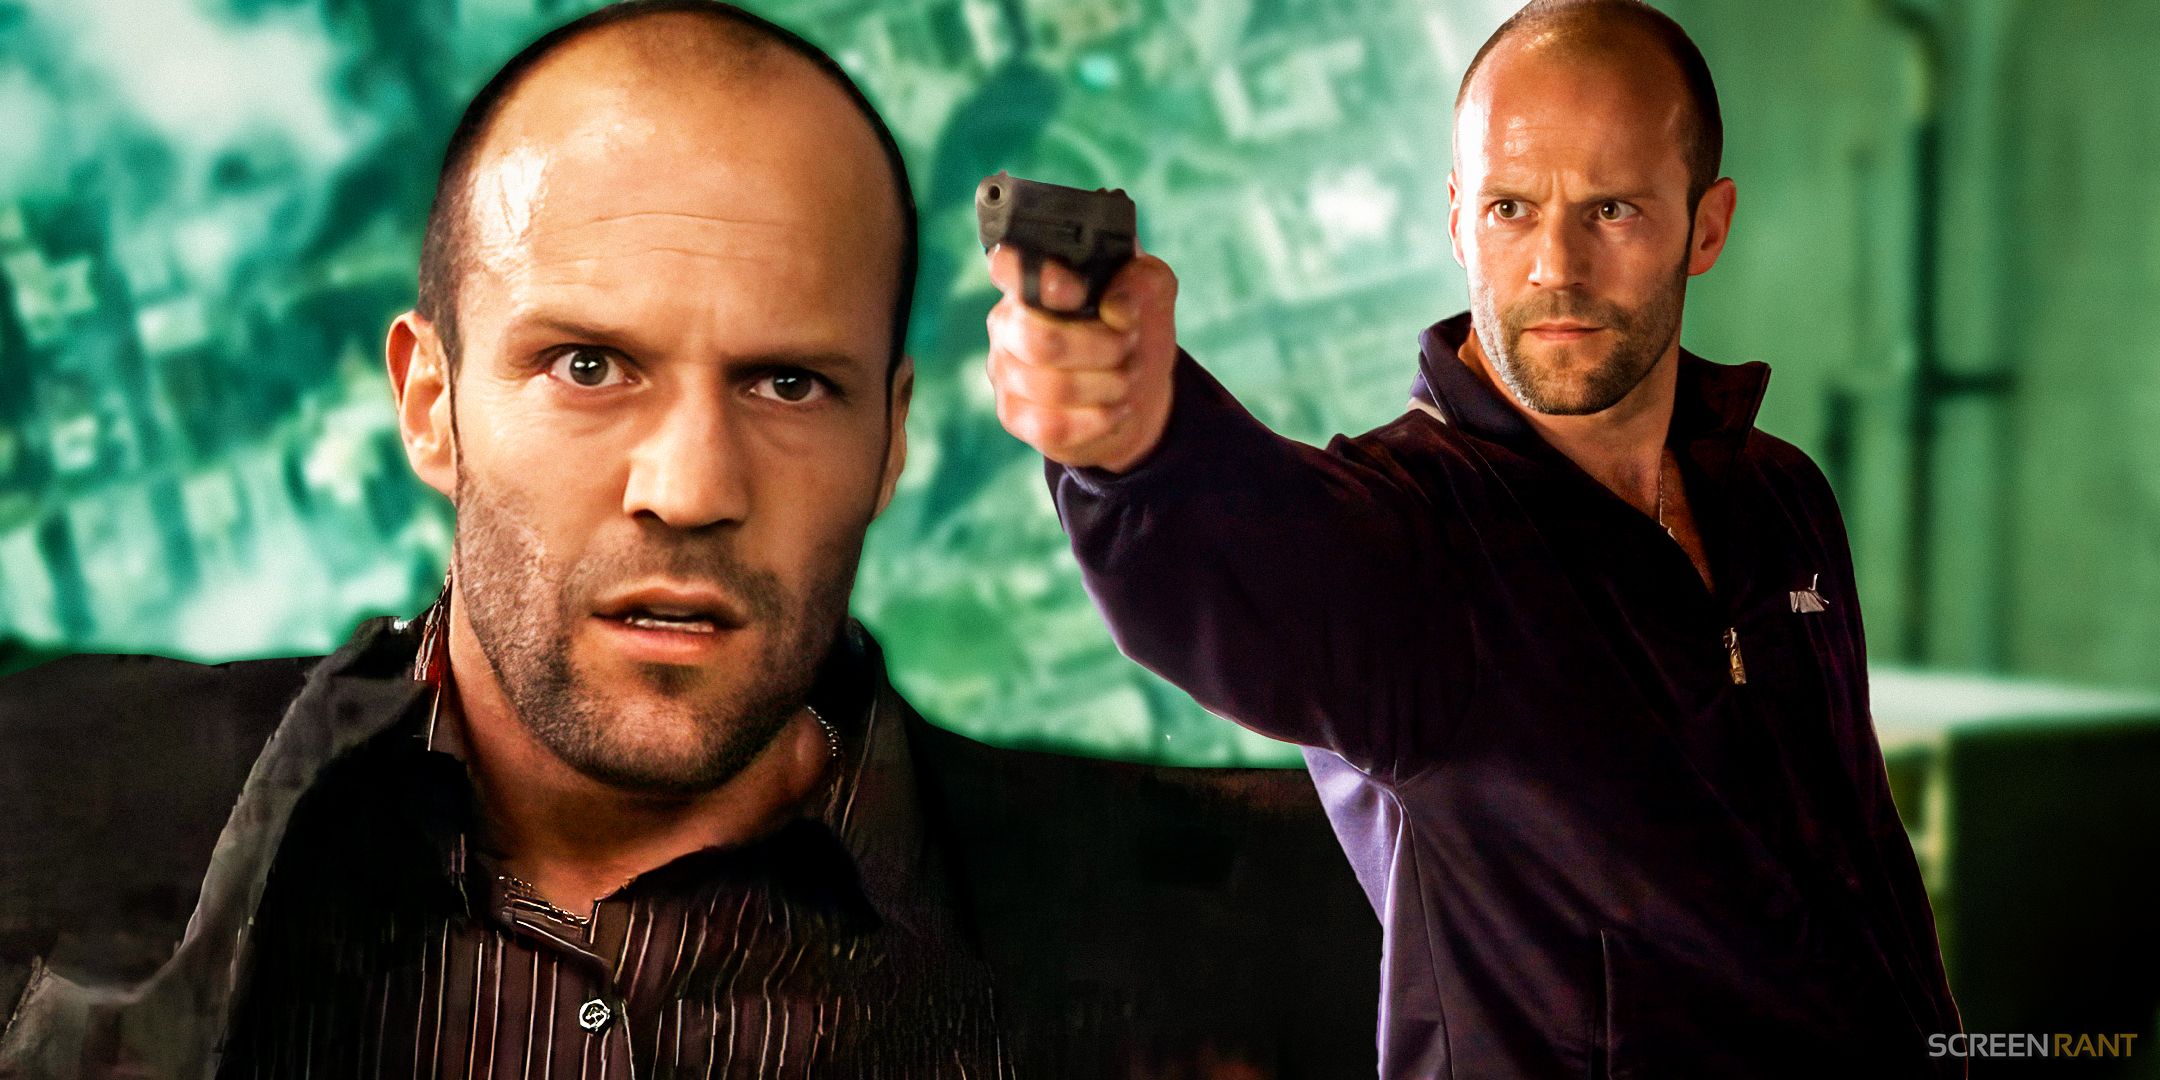 Jason Statham as Chev Chelios falling and pointing a gun in Crank 2006